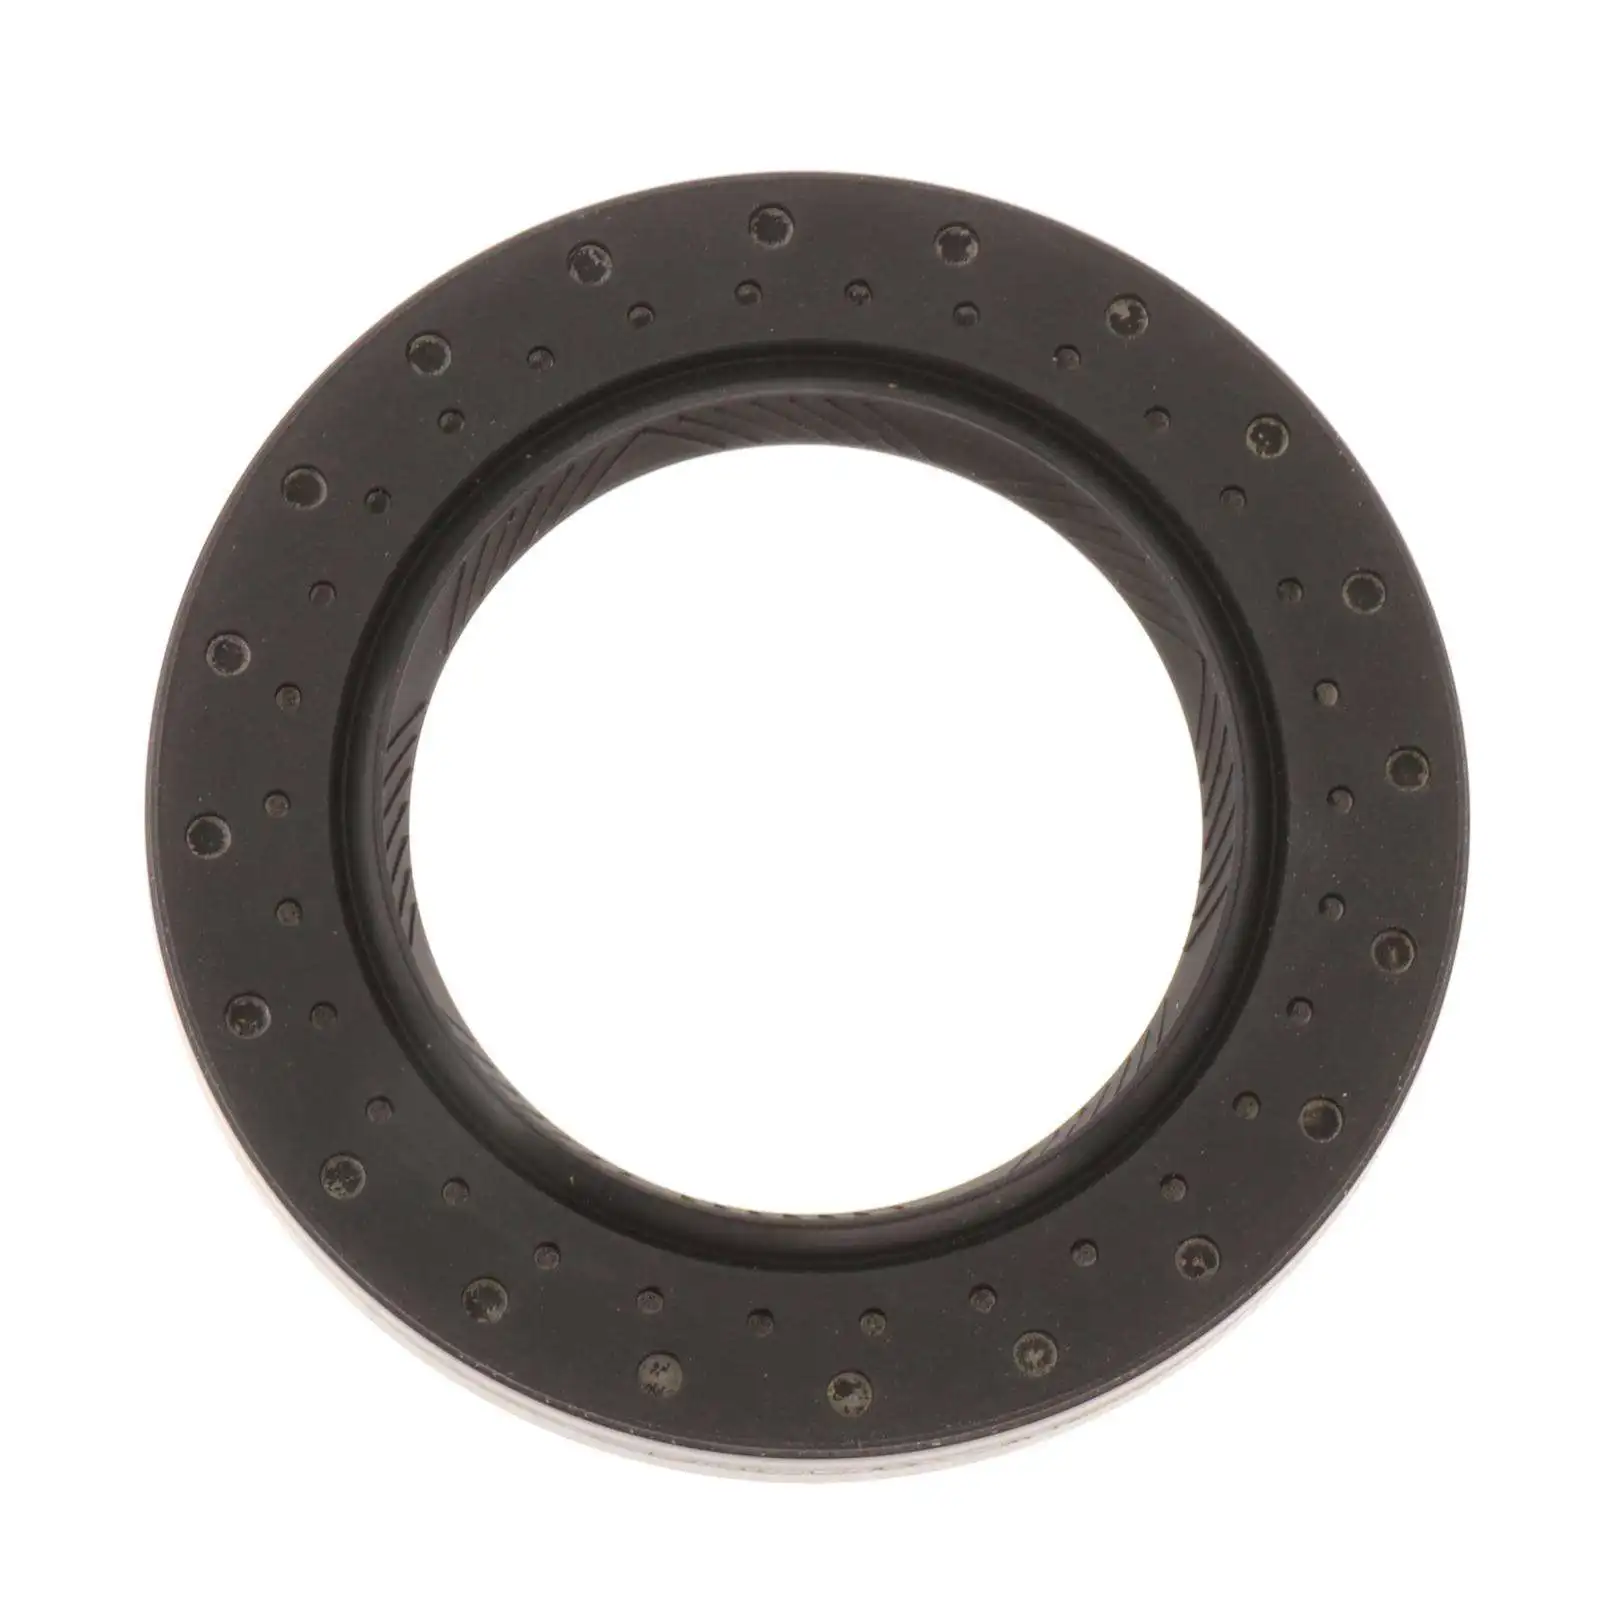 Front Oil Seal Automatic Transmission 6Dct250 Dps6 Oil Seal for Focus Fiesta Rubber Oil Resistance